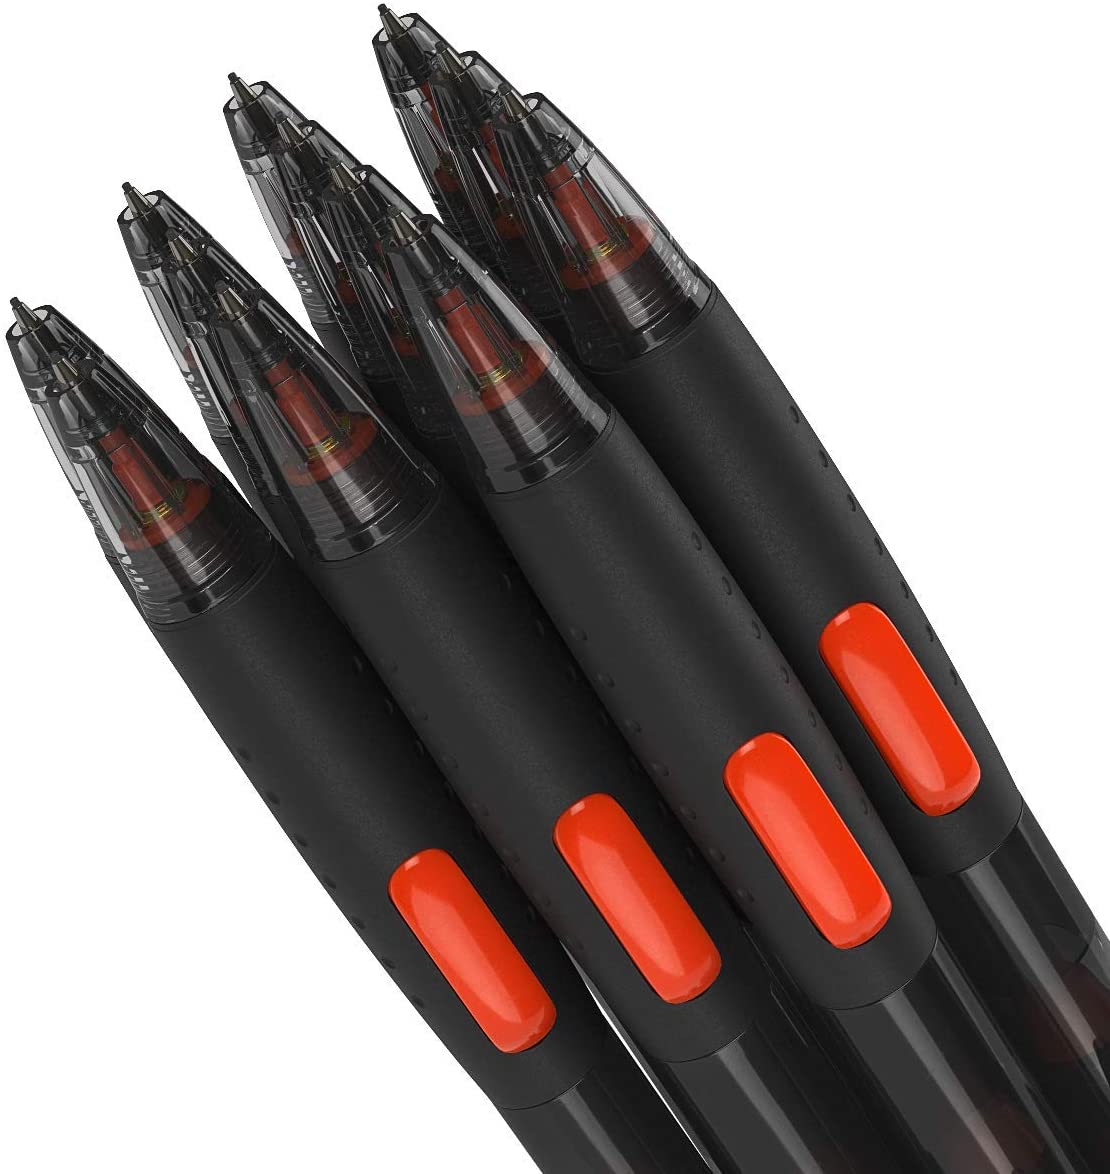 #2 HB Mechanical Pencils - 16 Pack with Refills